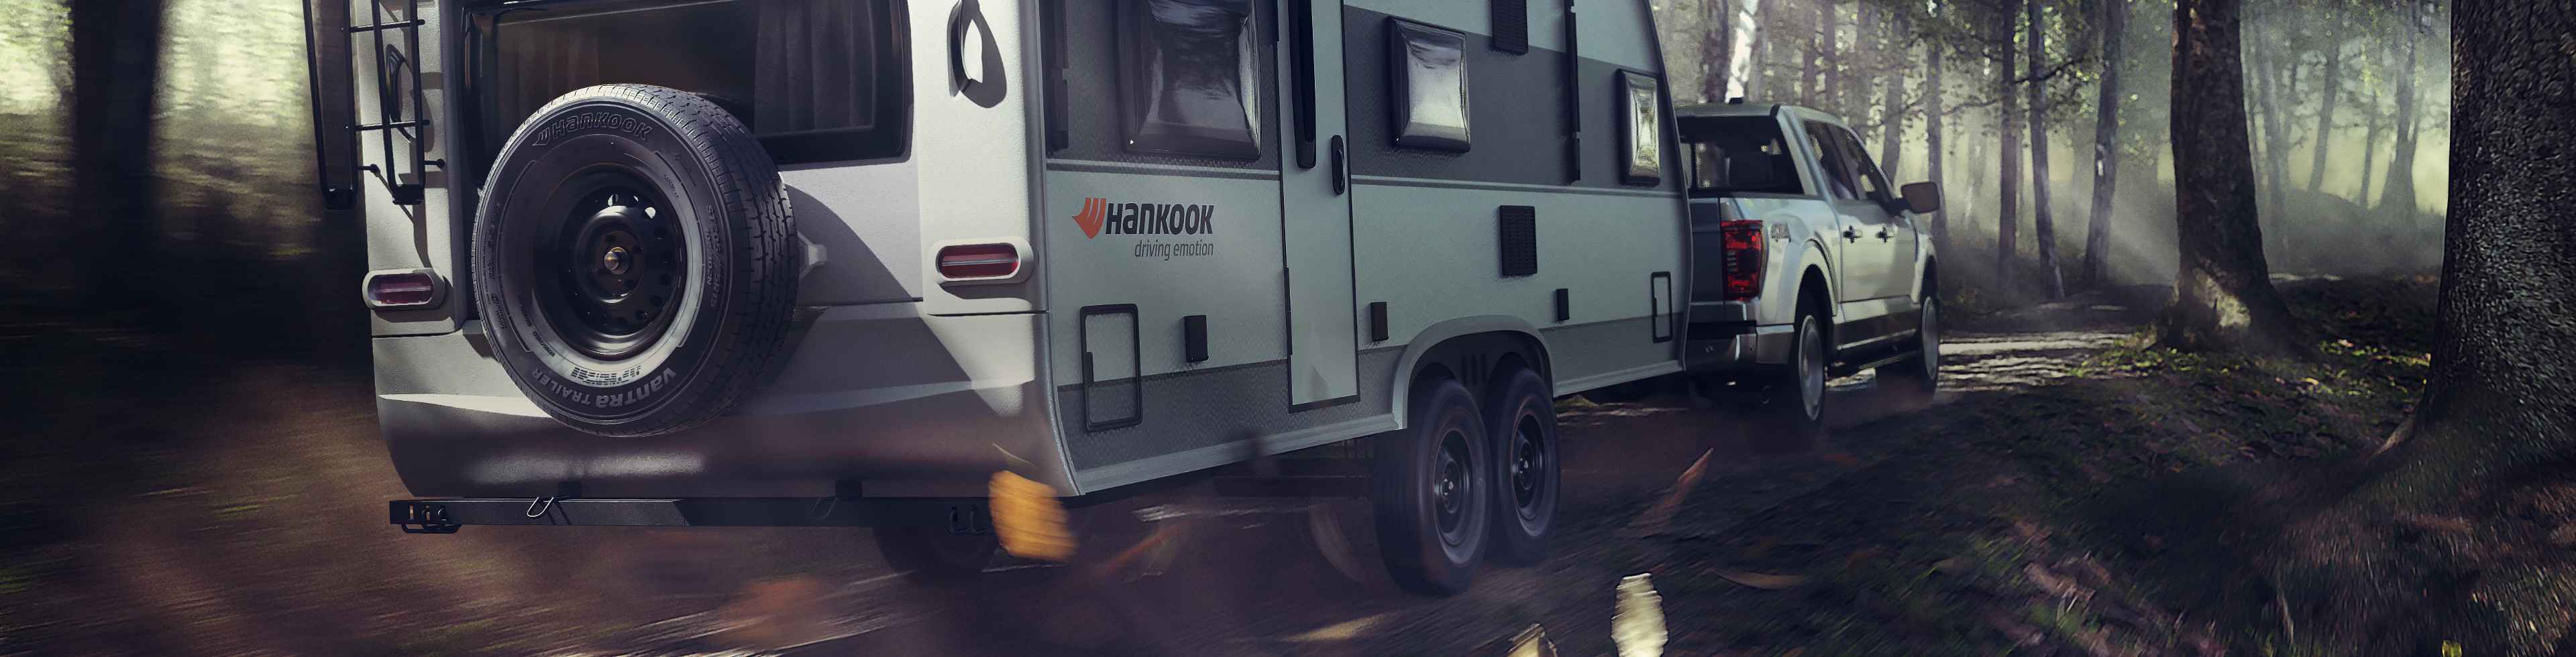 Vantra Tires - Search Family Hankook Product US | Tire By